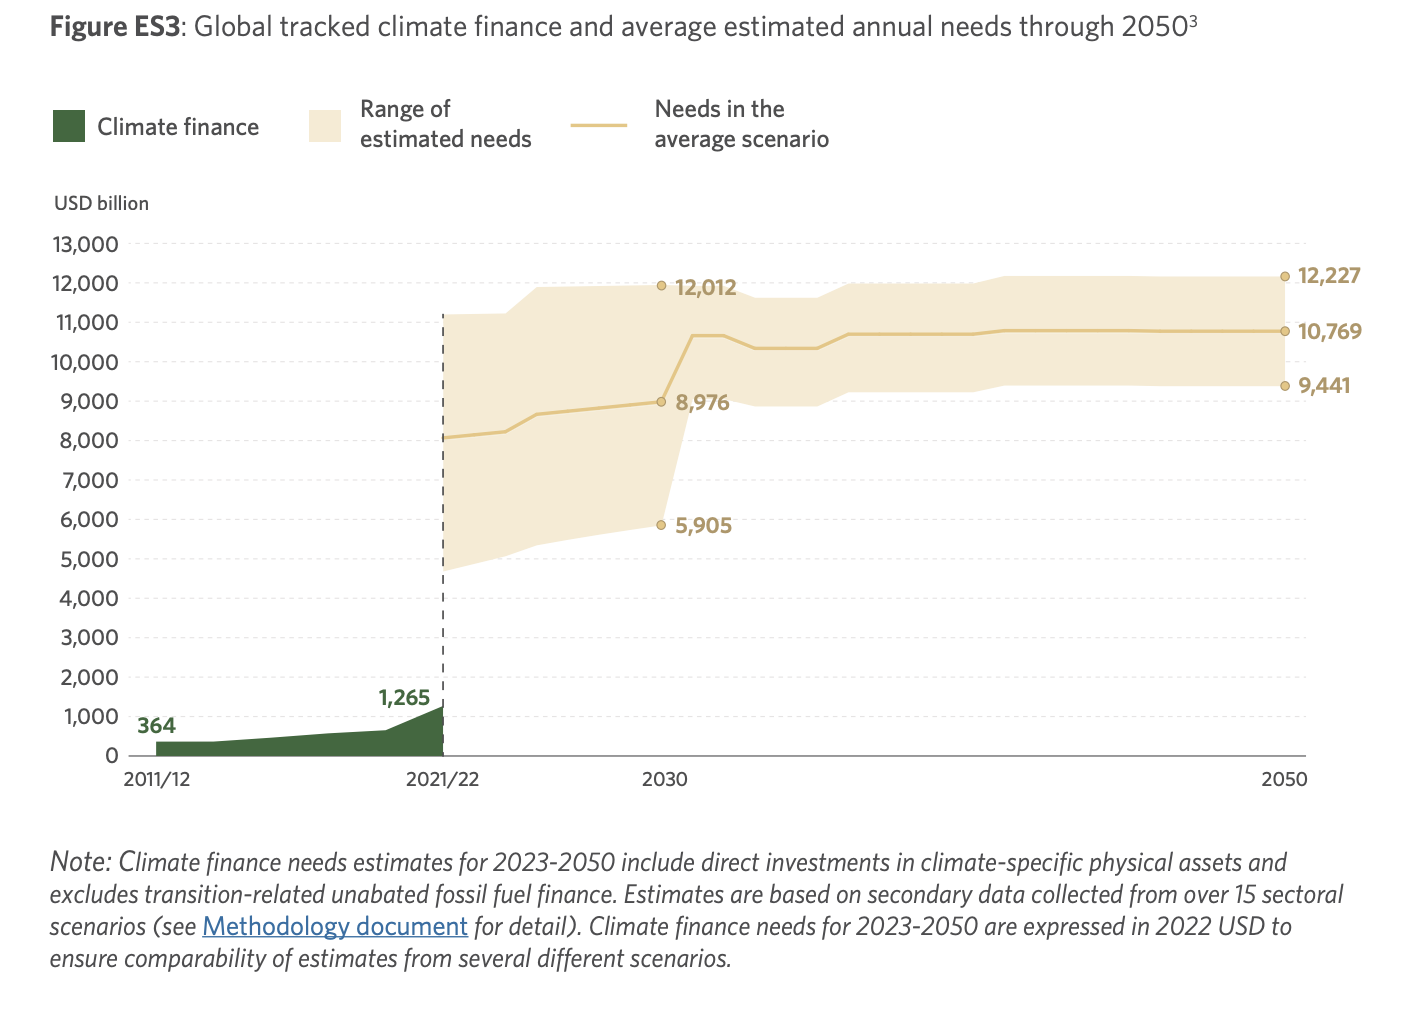 There is a significant gap between existing climate finance and that which is needed for transition to occur. Source: Graphic (https://www.climatepolicyinitiative.org/wp-content/uploads/2023/11/Global-Landscape-of-Climate-Finance-2023.pdf) by the Climate Policy Initiative, licensed under a CC BY-NC-SA 4.0 License.